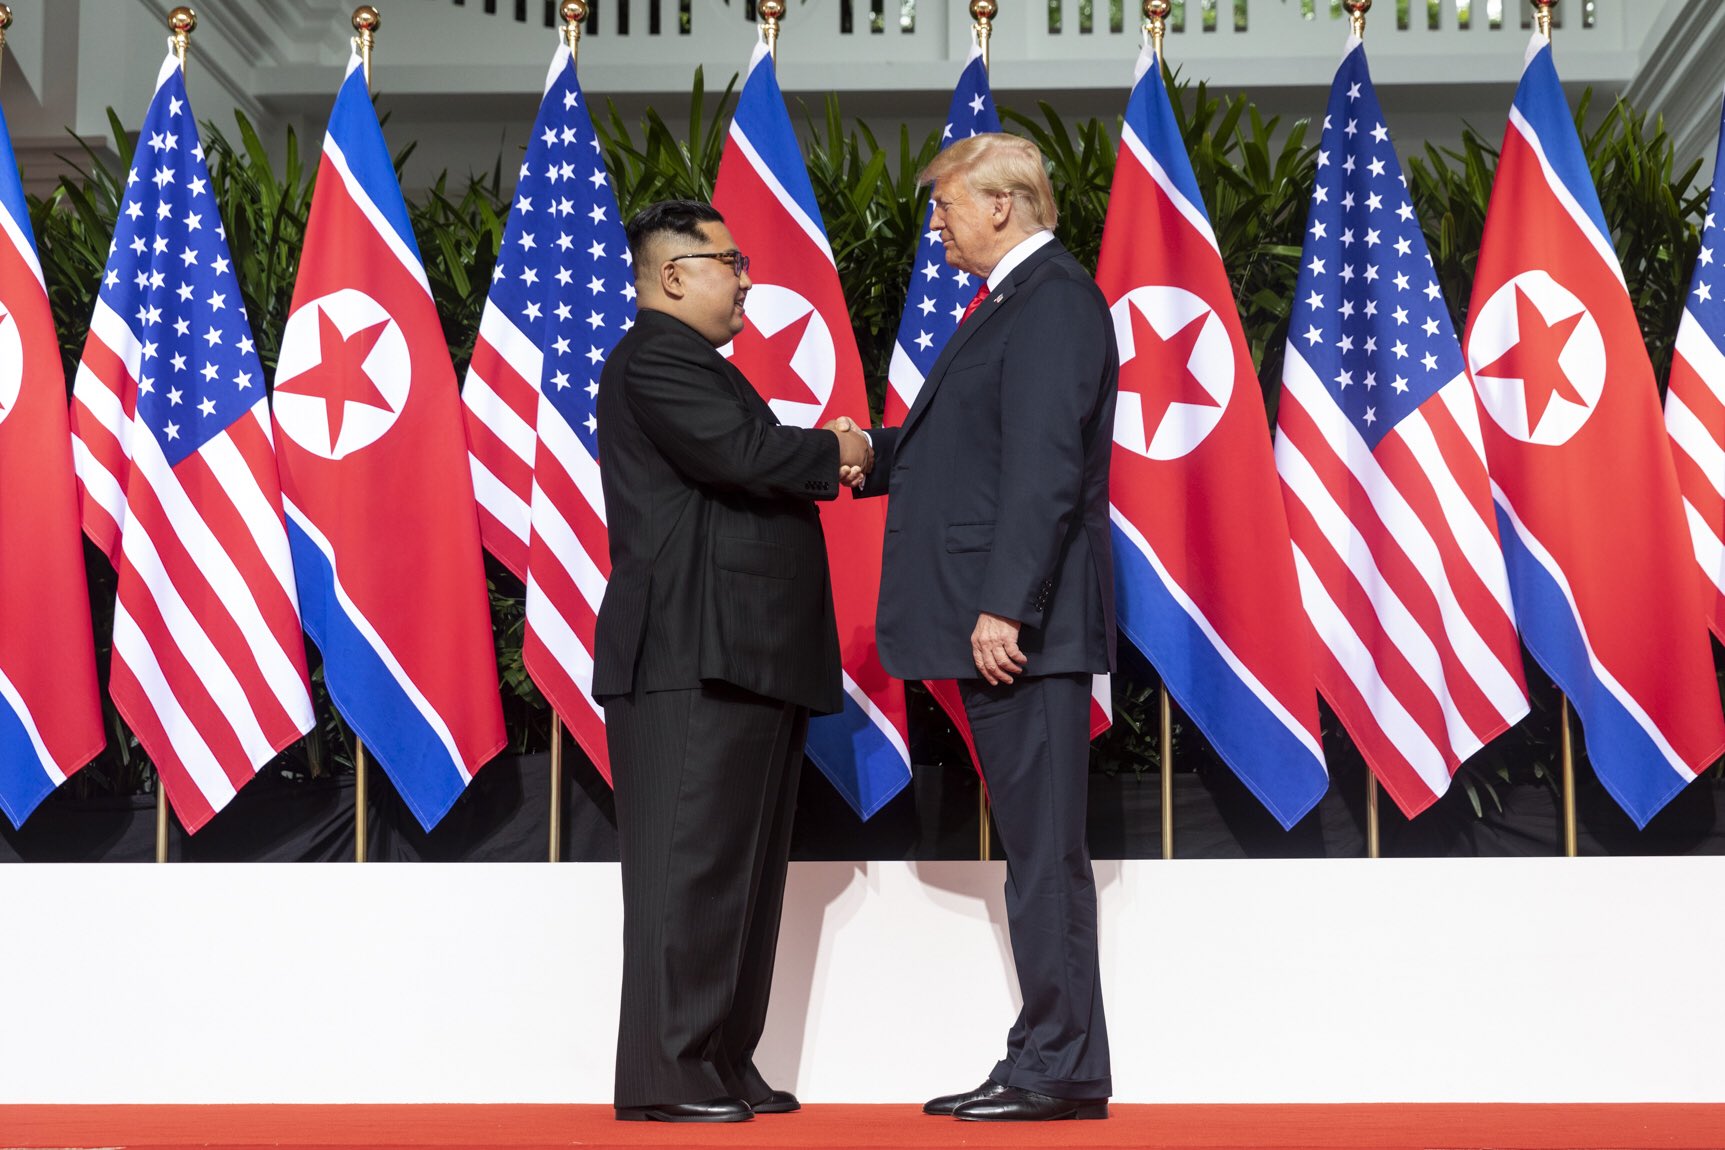 Kim and Trump shaking hands at the red carpet during the DPRK–USA Singapore Summit / Da Nang summit